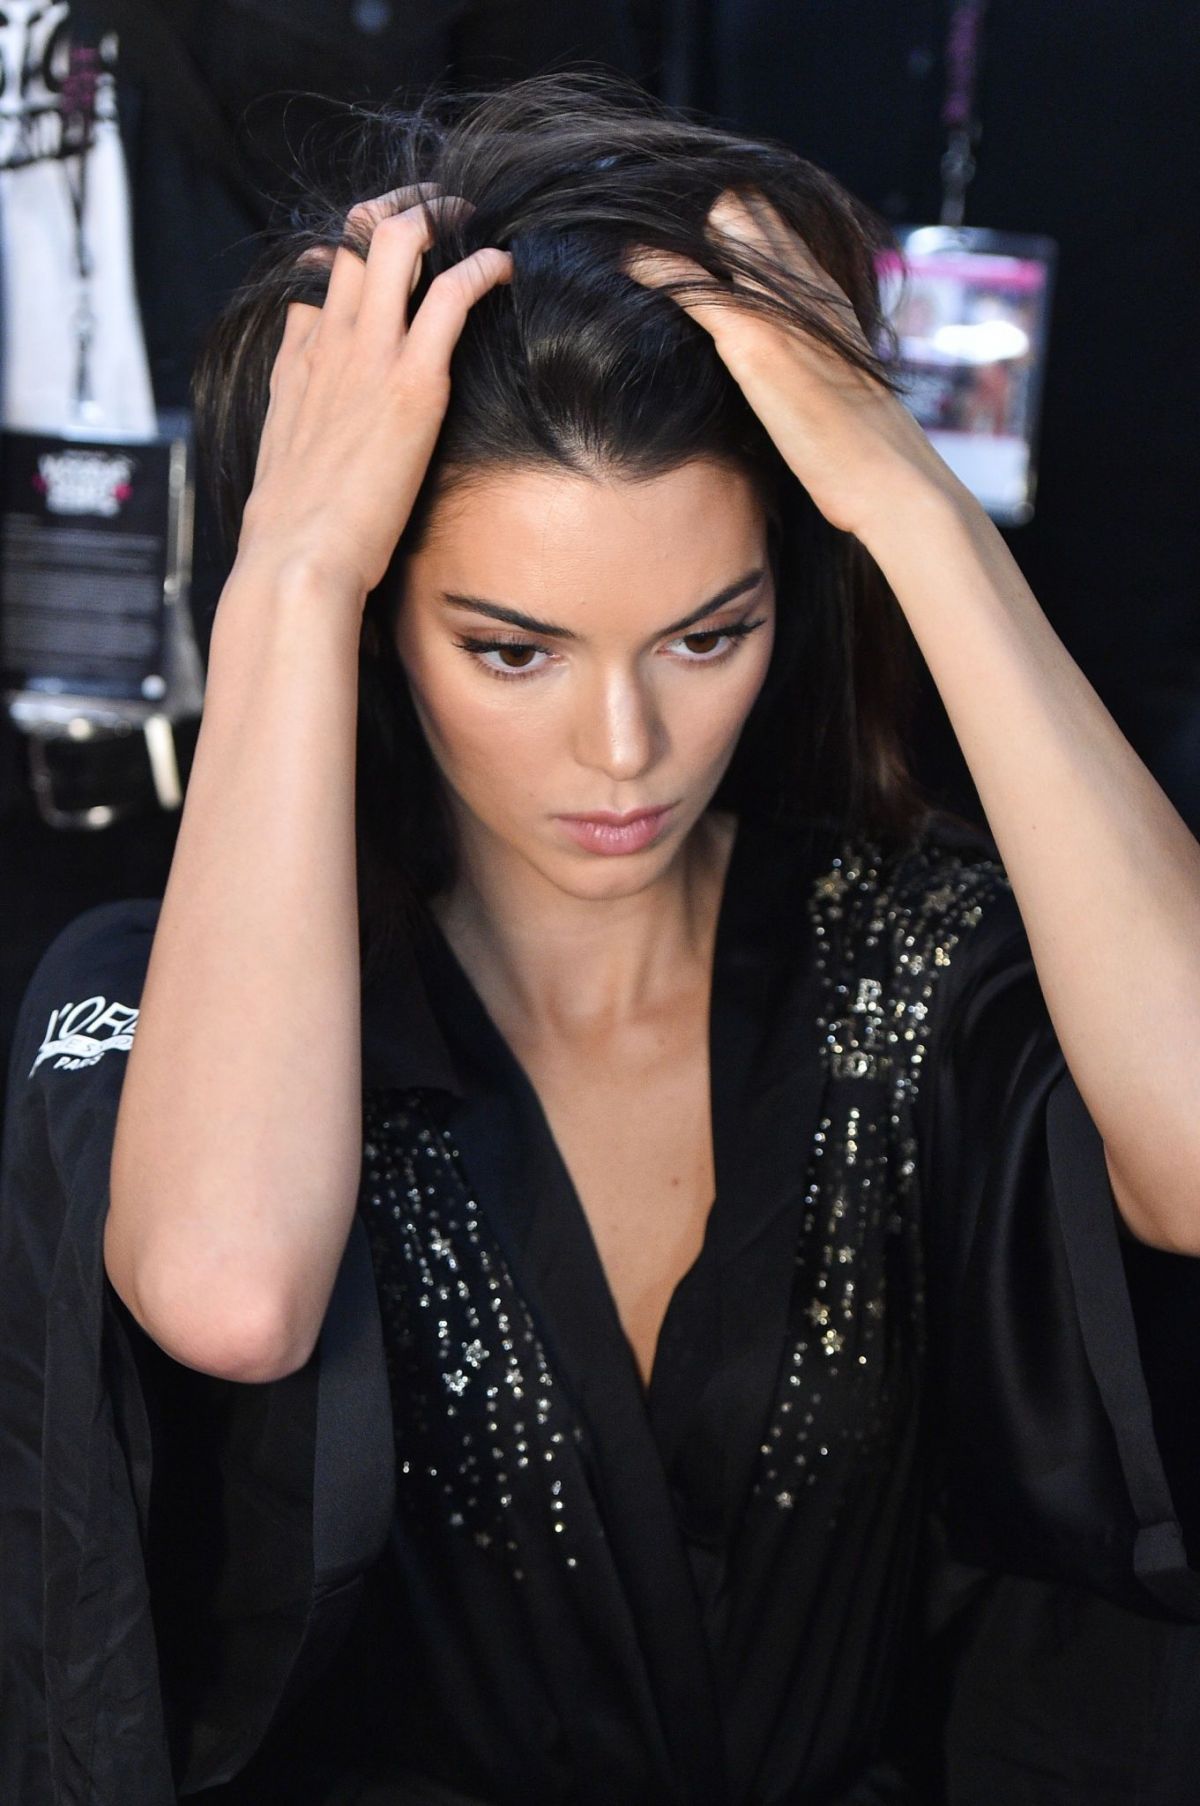 Kendall Jenner On The Backstage Of Victoria’s Secret Fashion Show In New York 11 08 2018